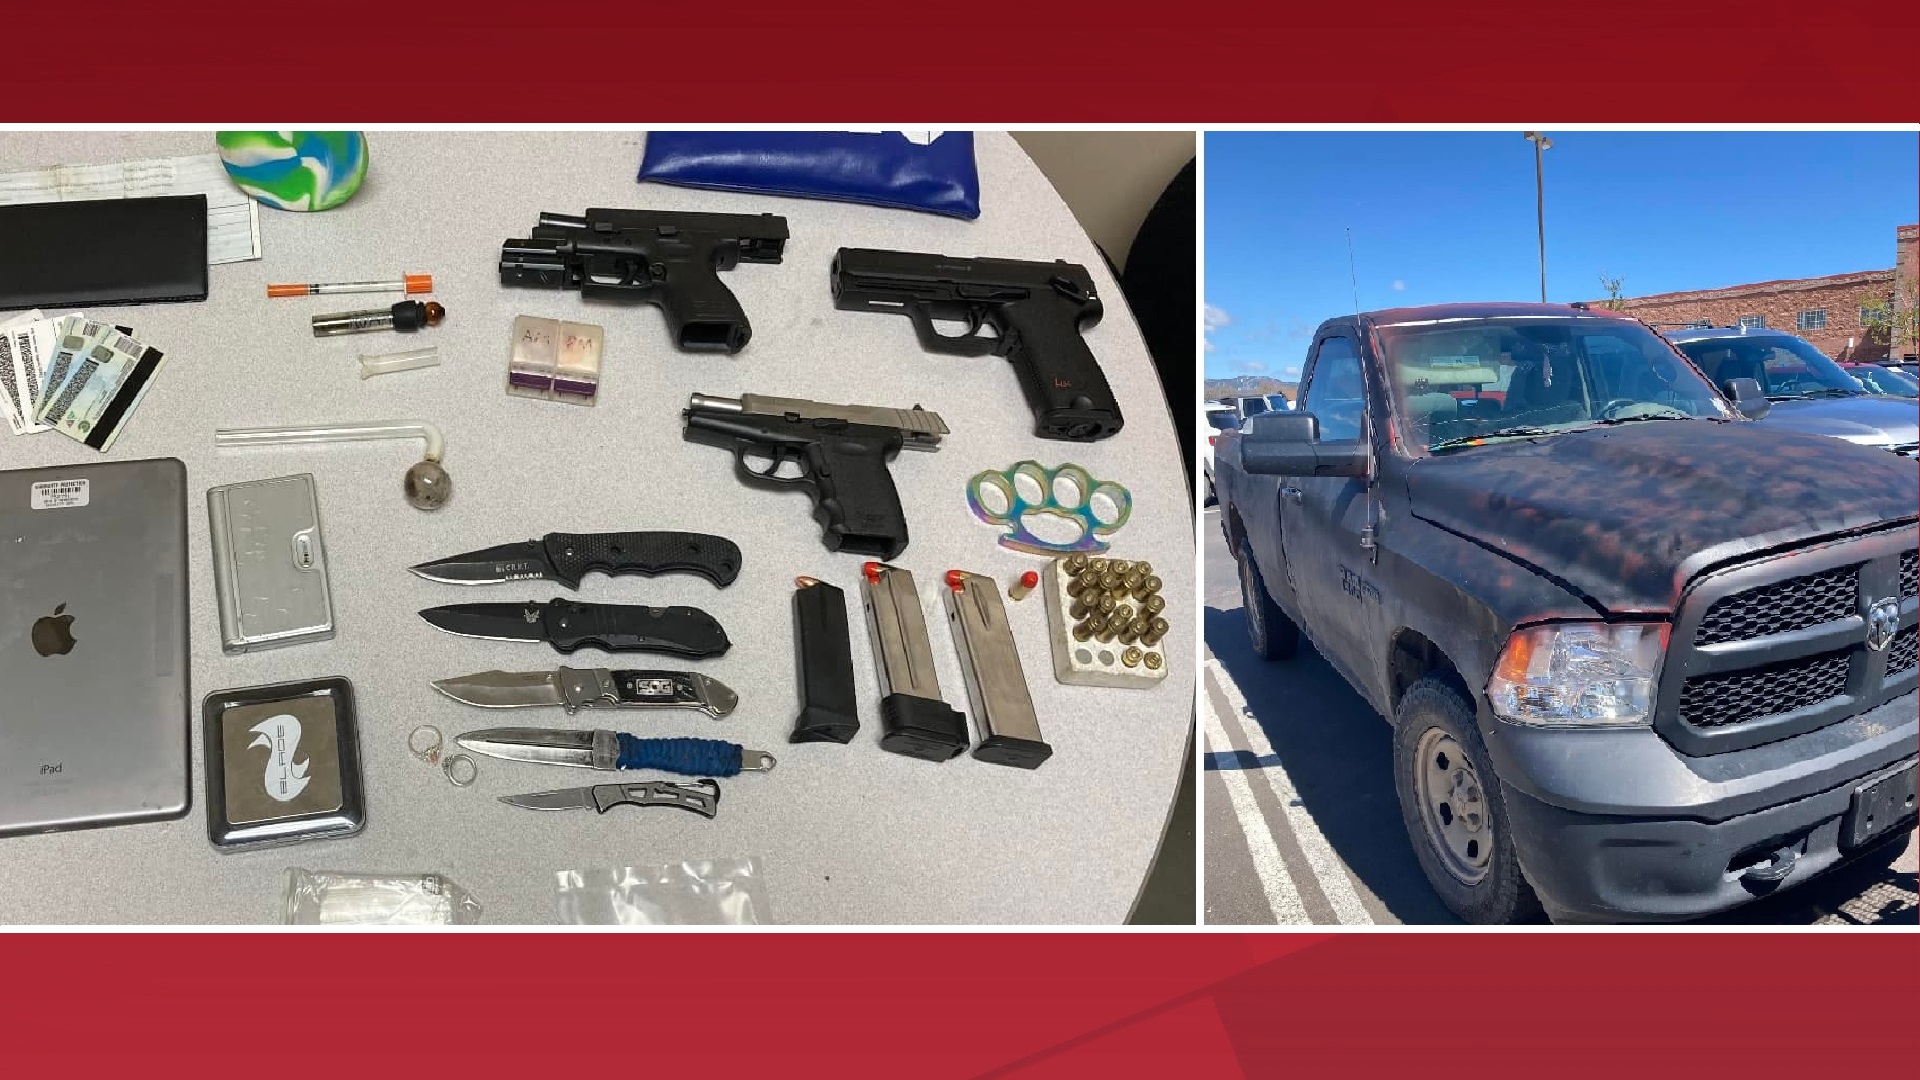 drugs, firearms, and stolen vehicle were recovered at Colorado Springs motel